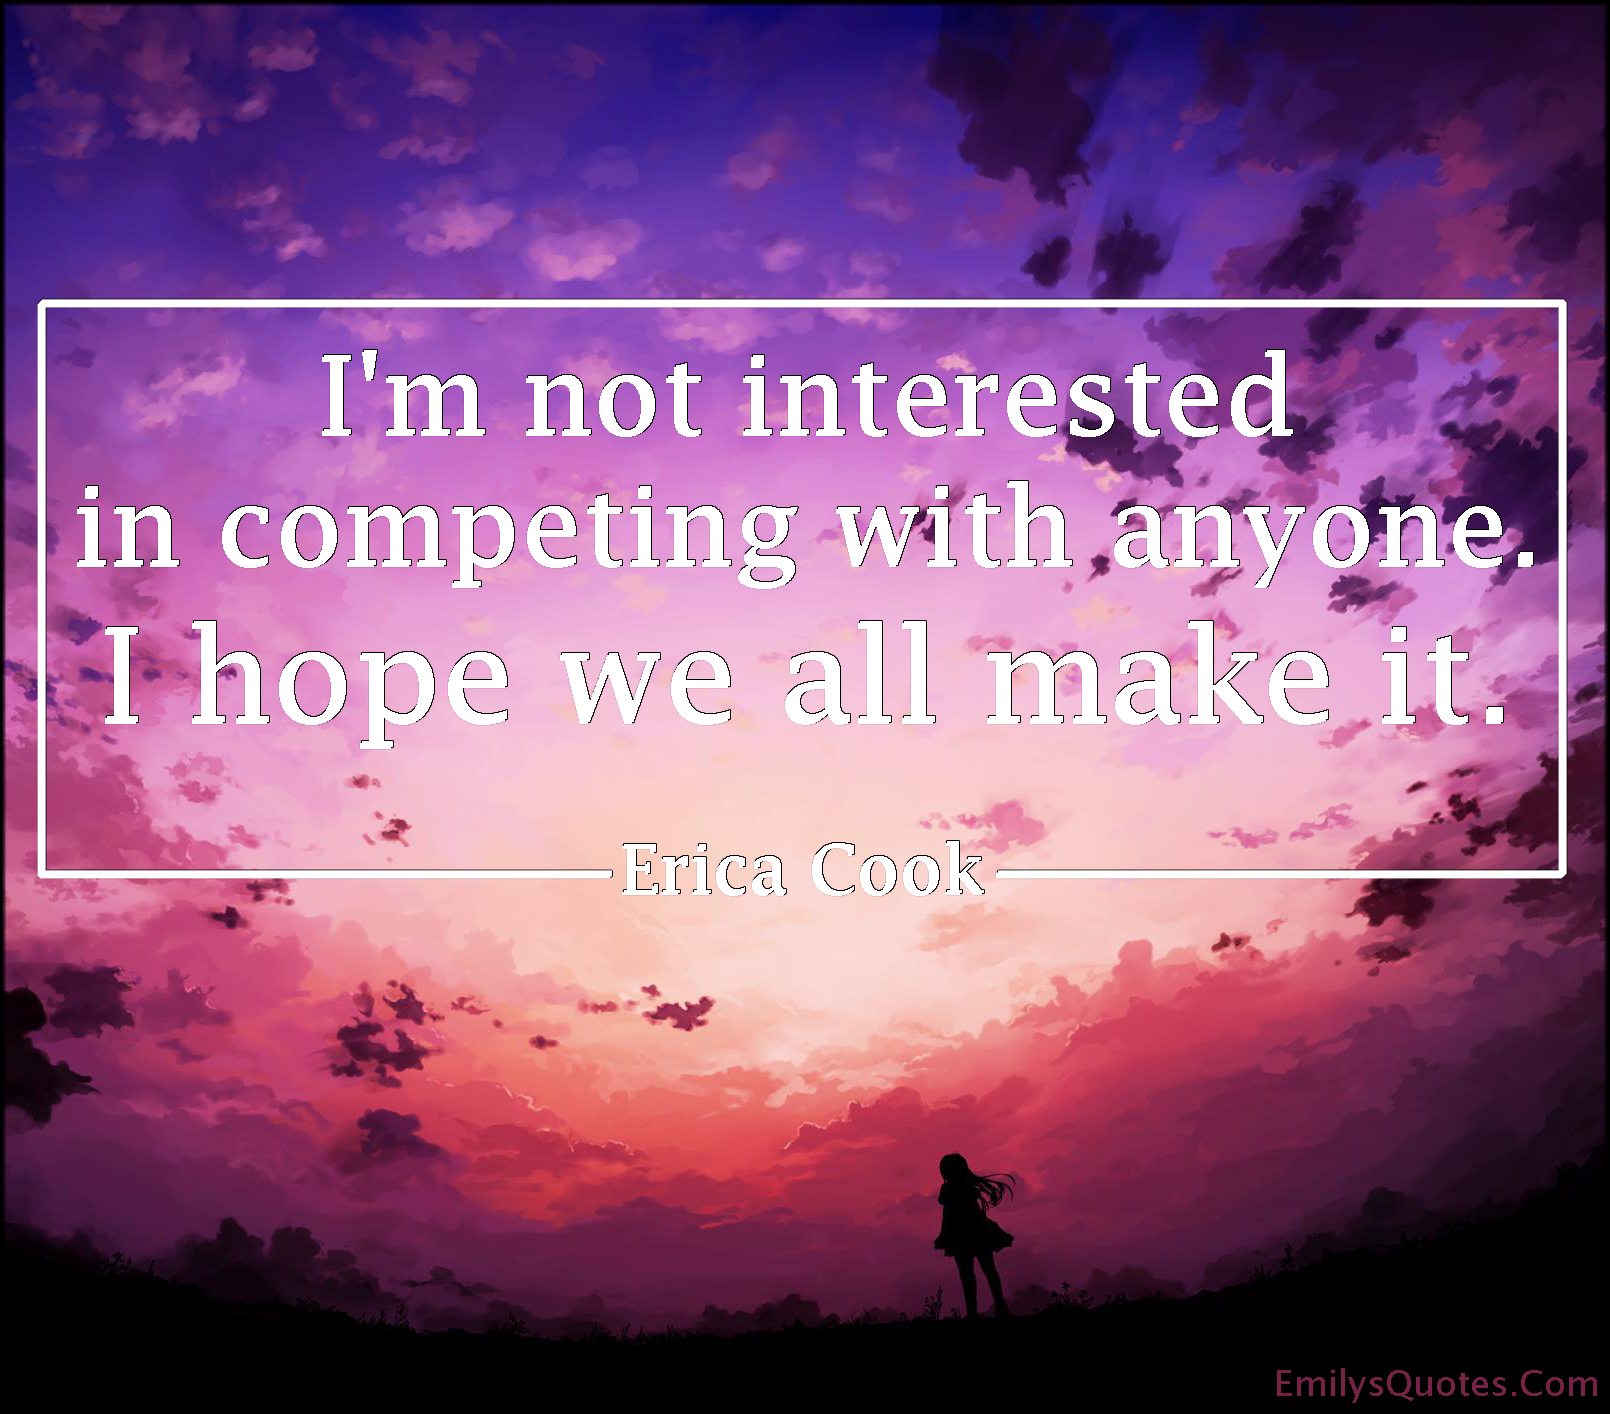 I’m not interested in competing with anyone. I hope we all make it